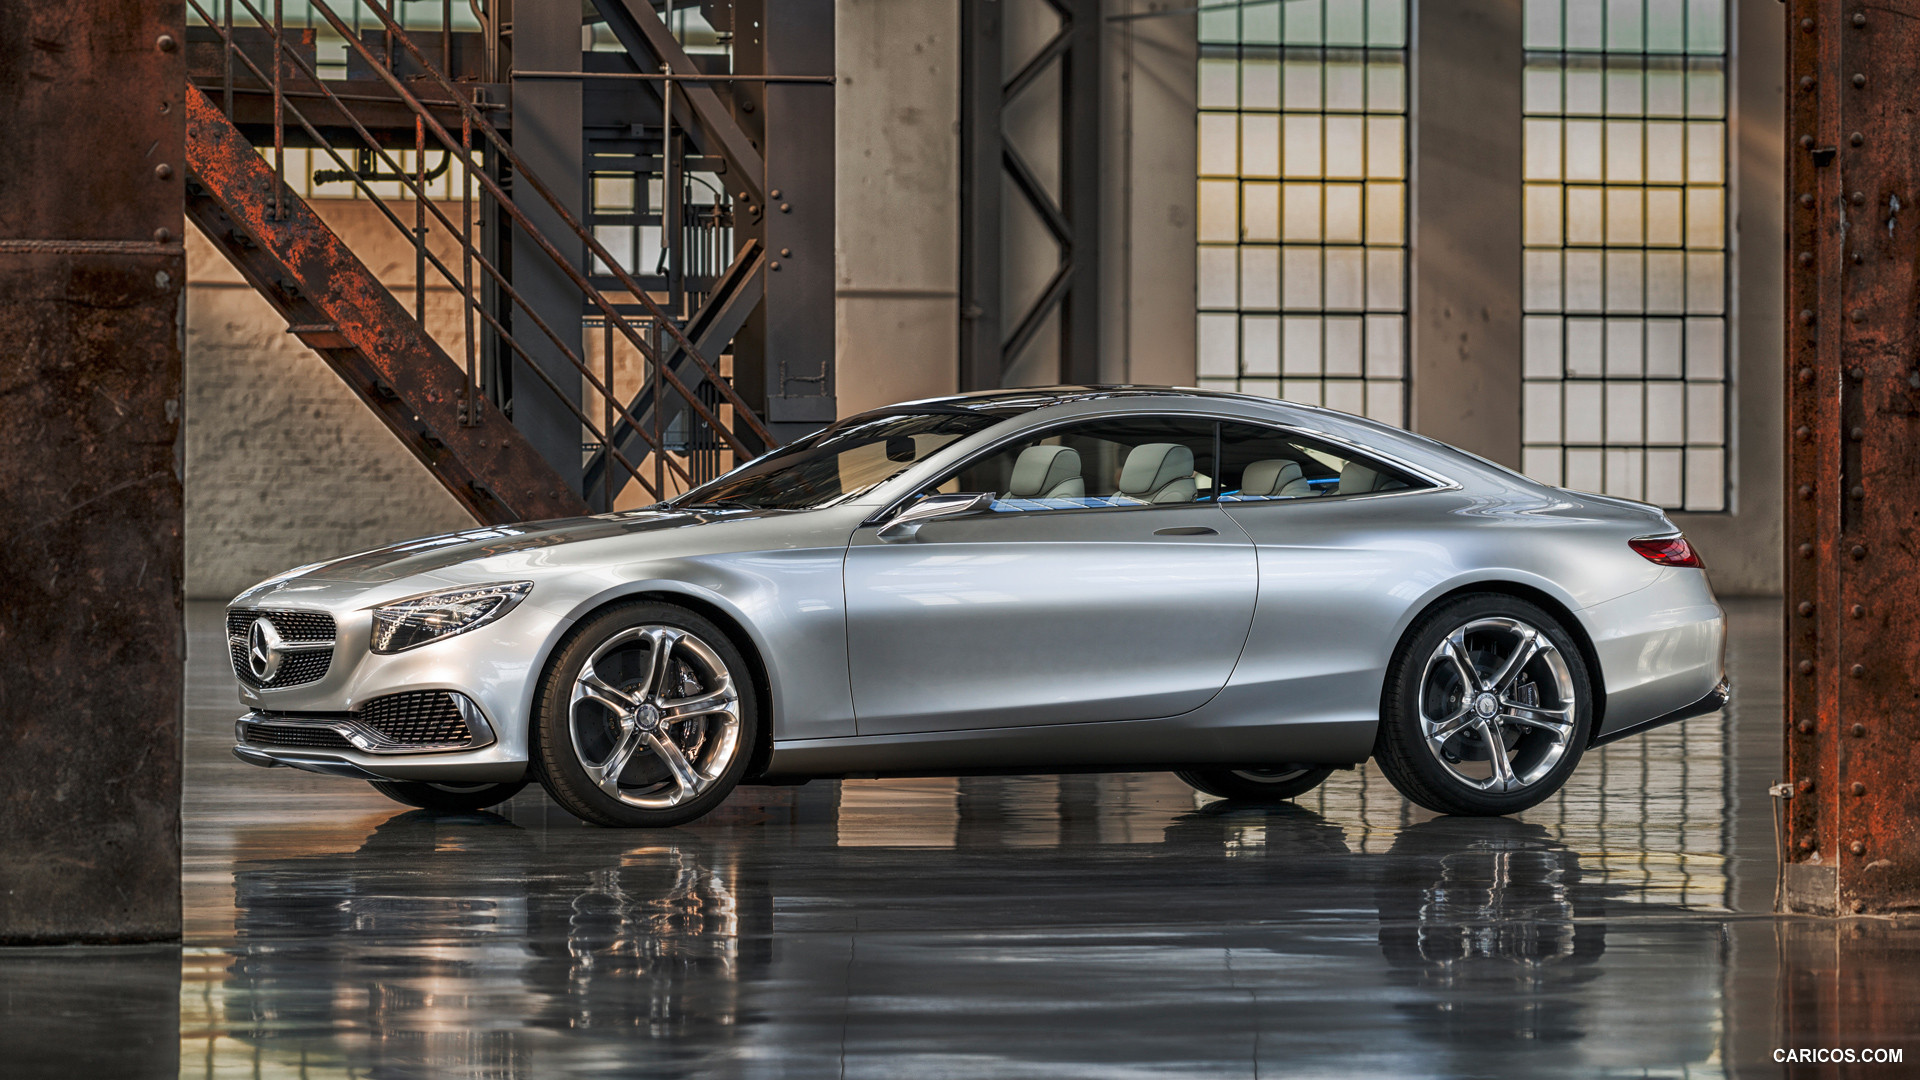 Mercedes-Benz S-Class Coupe Concept (2013)  - Side, #19 of 58